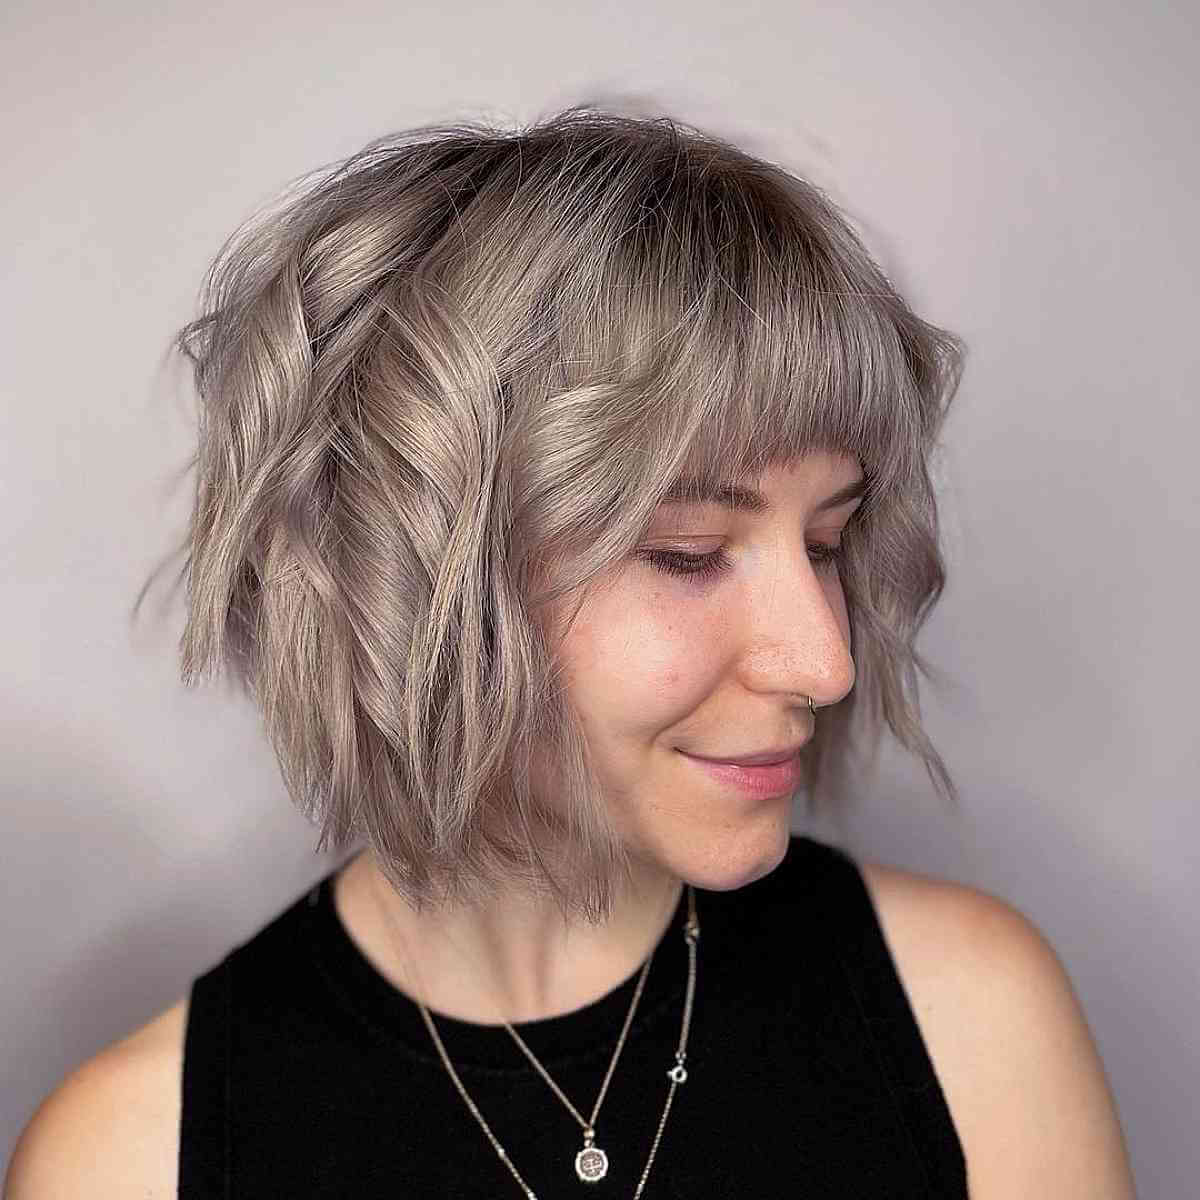 Chin-Length Layered Haircut with a Fringe